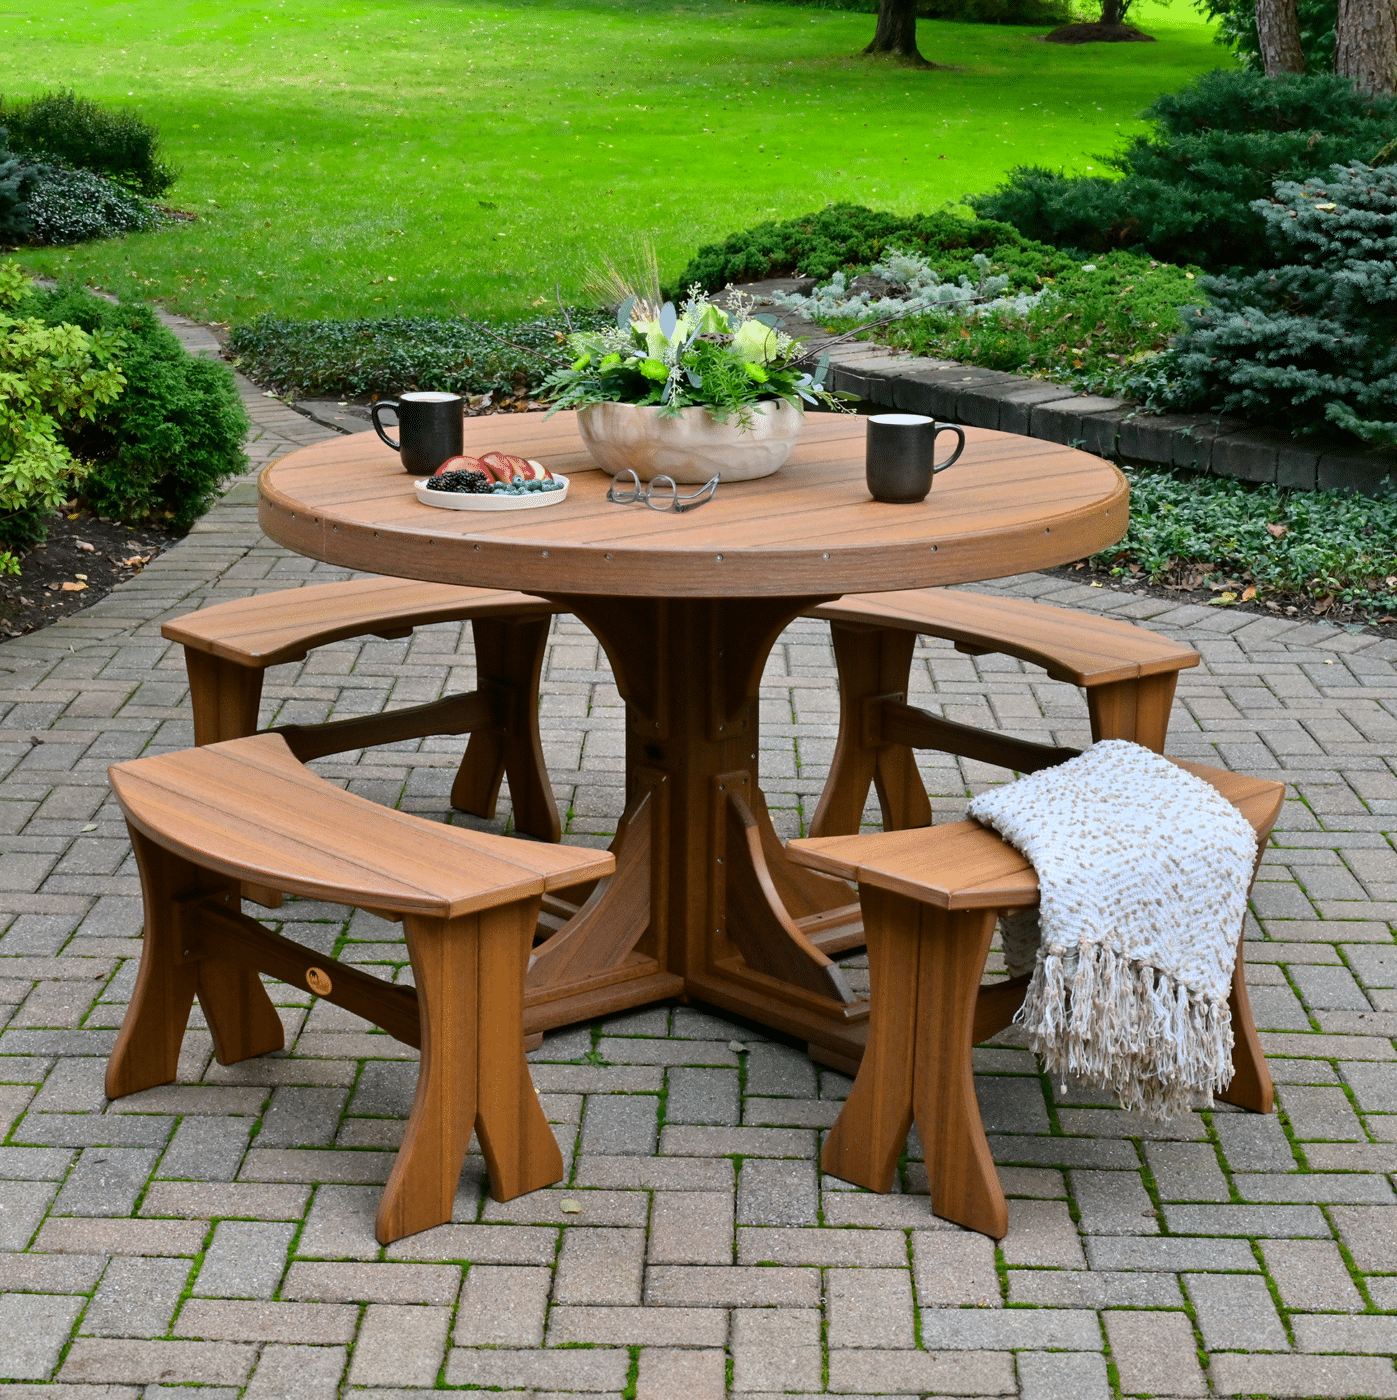 4′ round table from premier building solutions in virginia